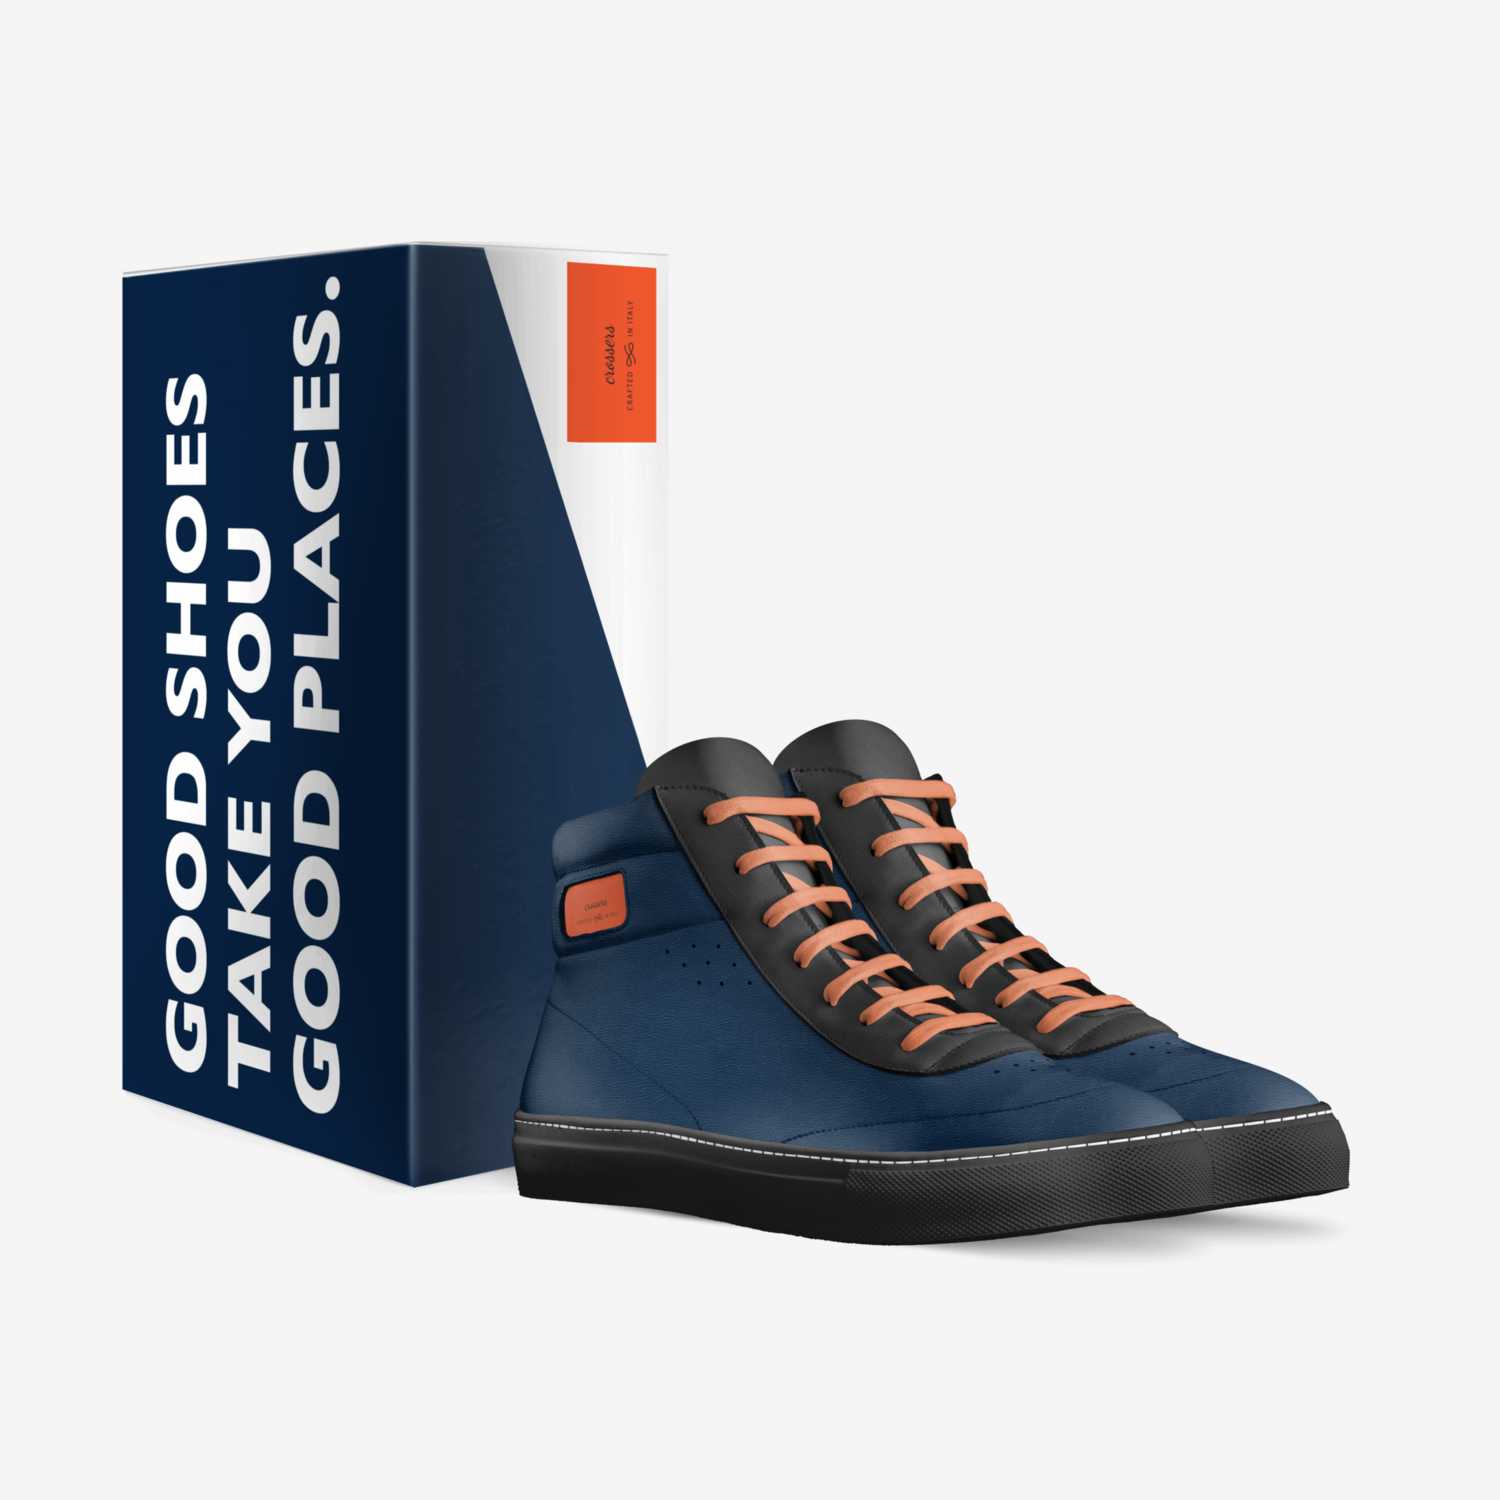 crossers custom made in Italy shoes by Crossmerritt | Box view